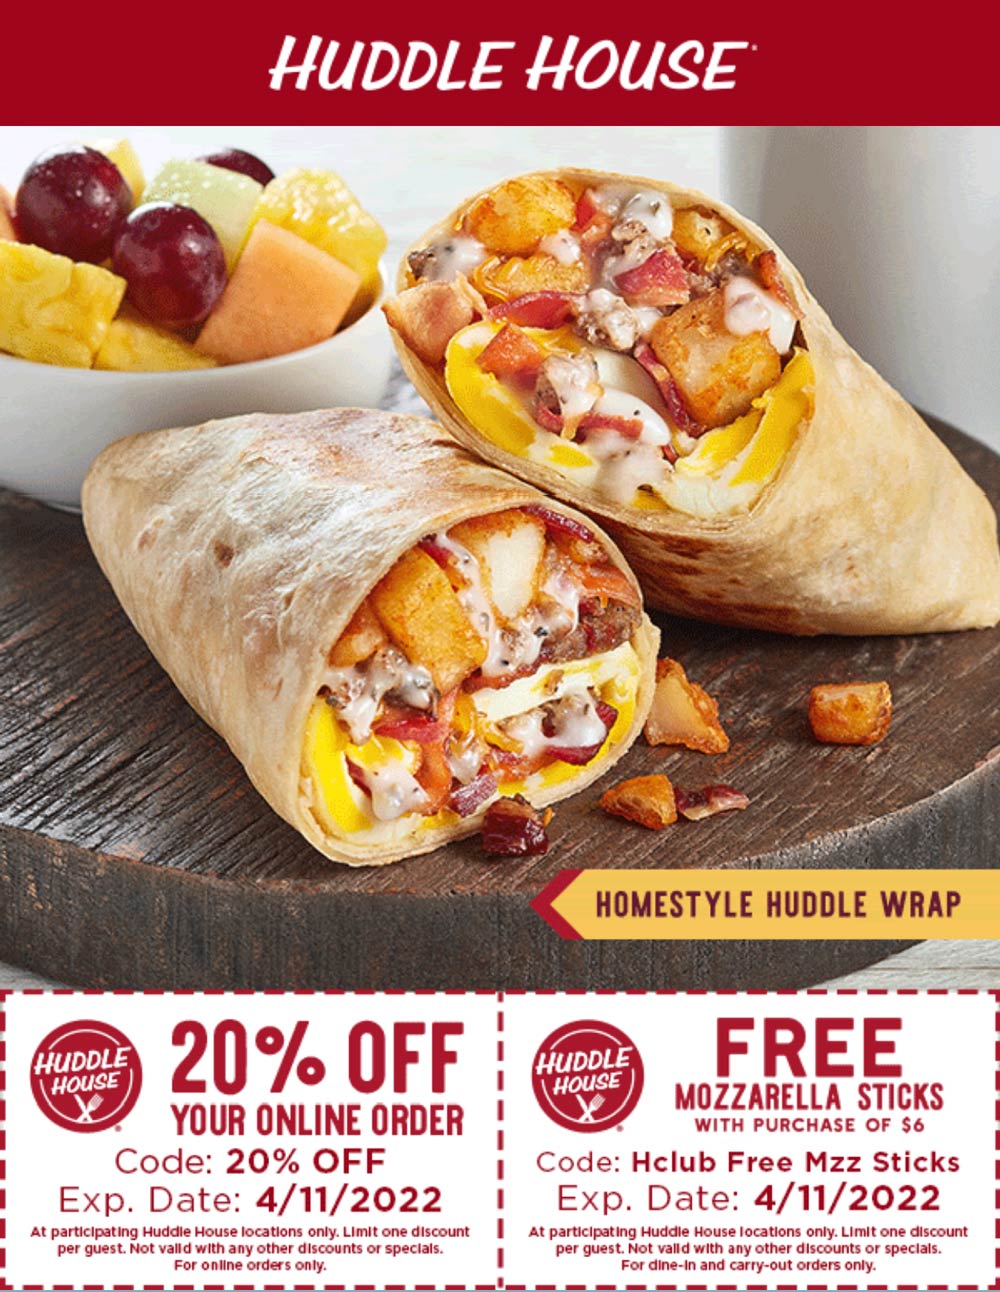 Huddle House restaurants Coupon  20% off & free mozzarella sticks at Huddle House restaurants #huddlehouse 